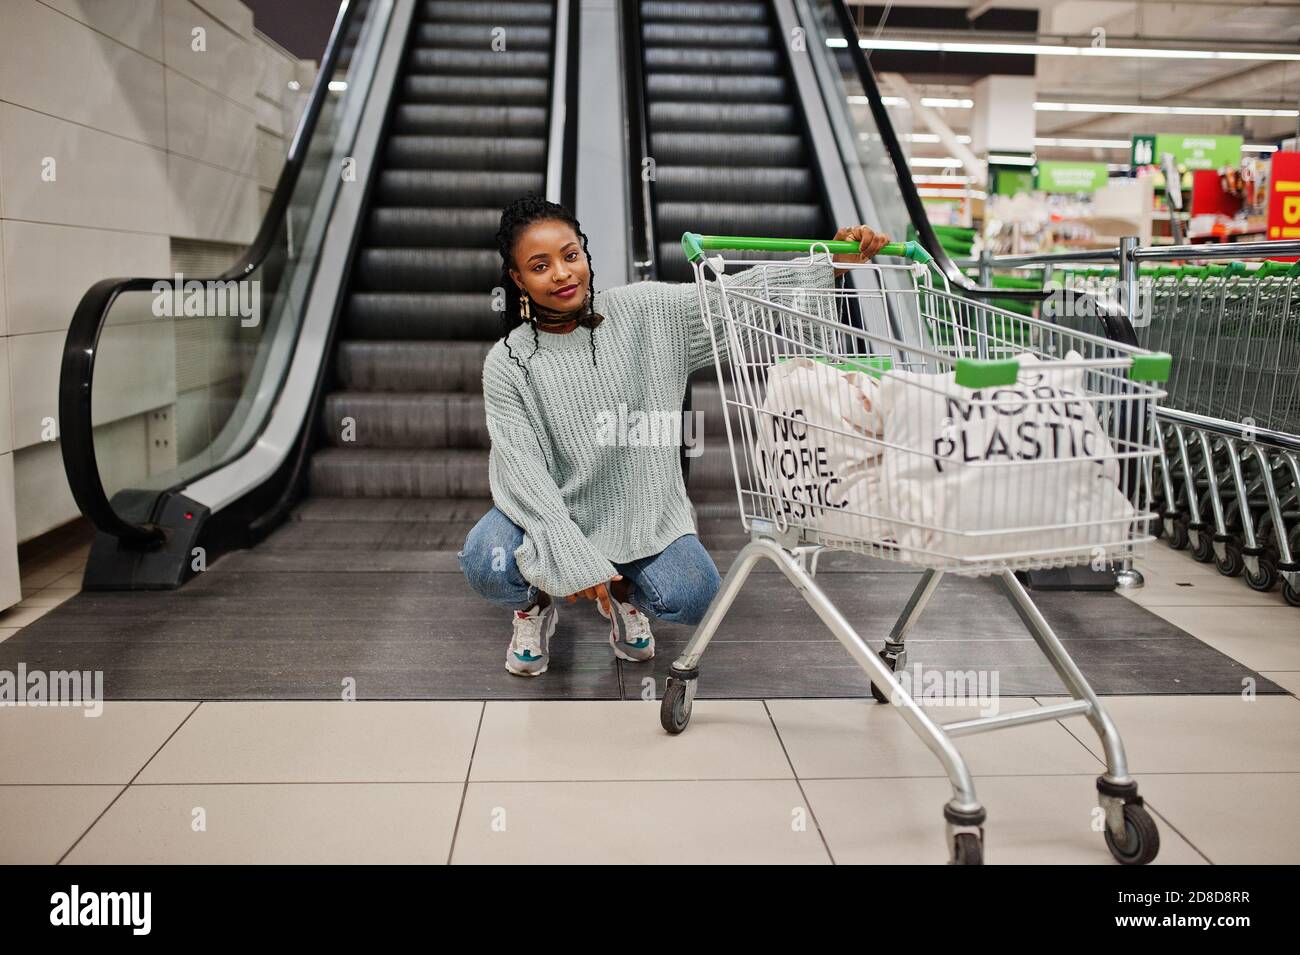 No more plastic. African woman with shopping cart trolley posed at supermarket against escalator stairs. Stock Photo